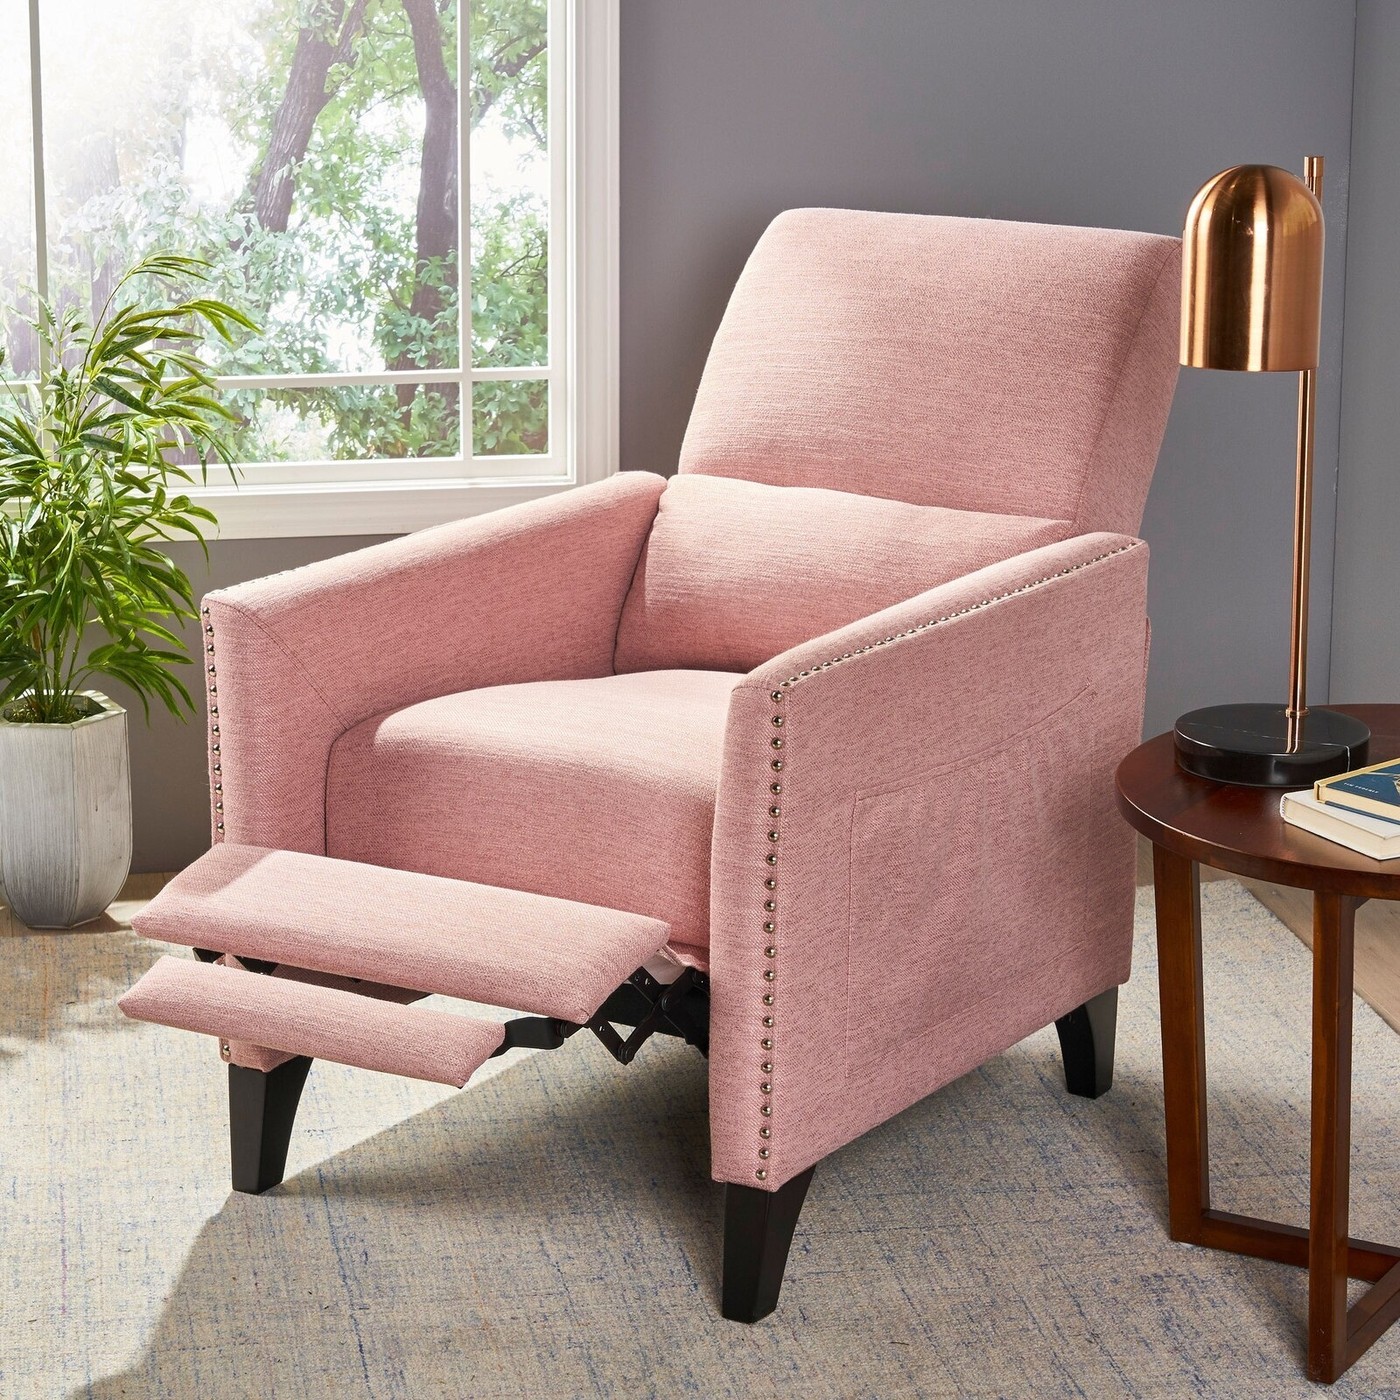 Small Recliners for Bedroom - VisualHunt